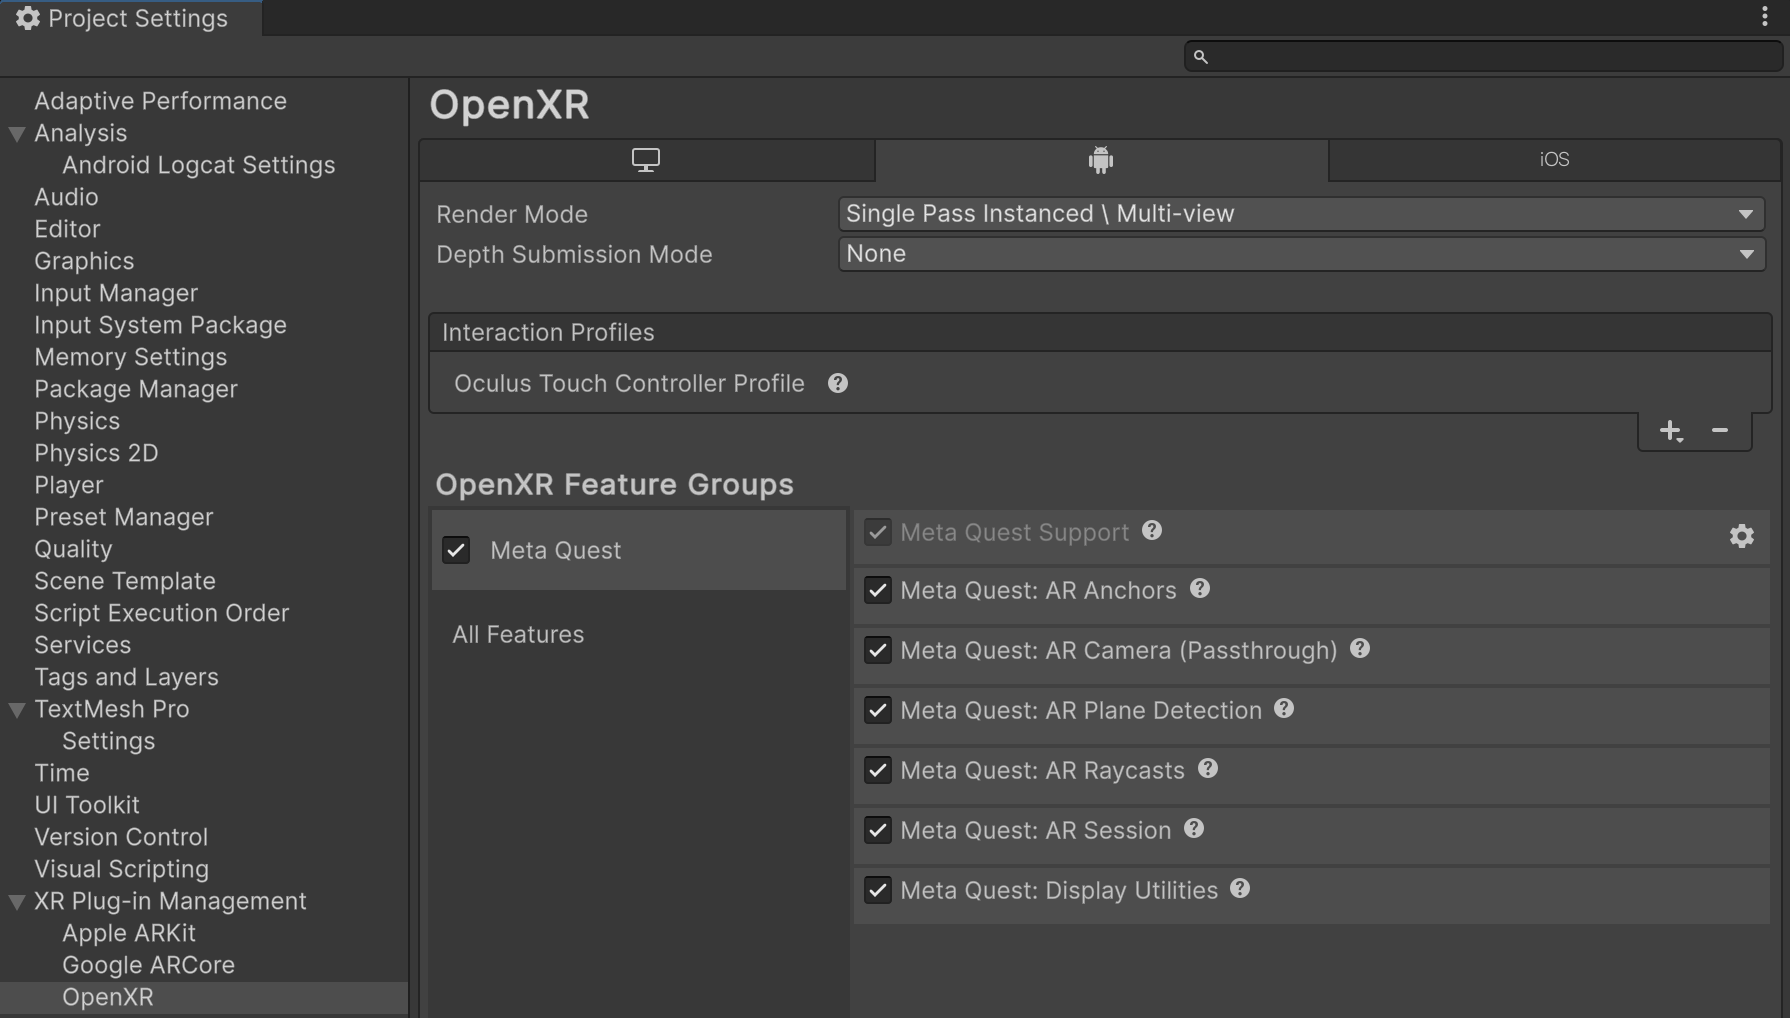 openxr features all